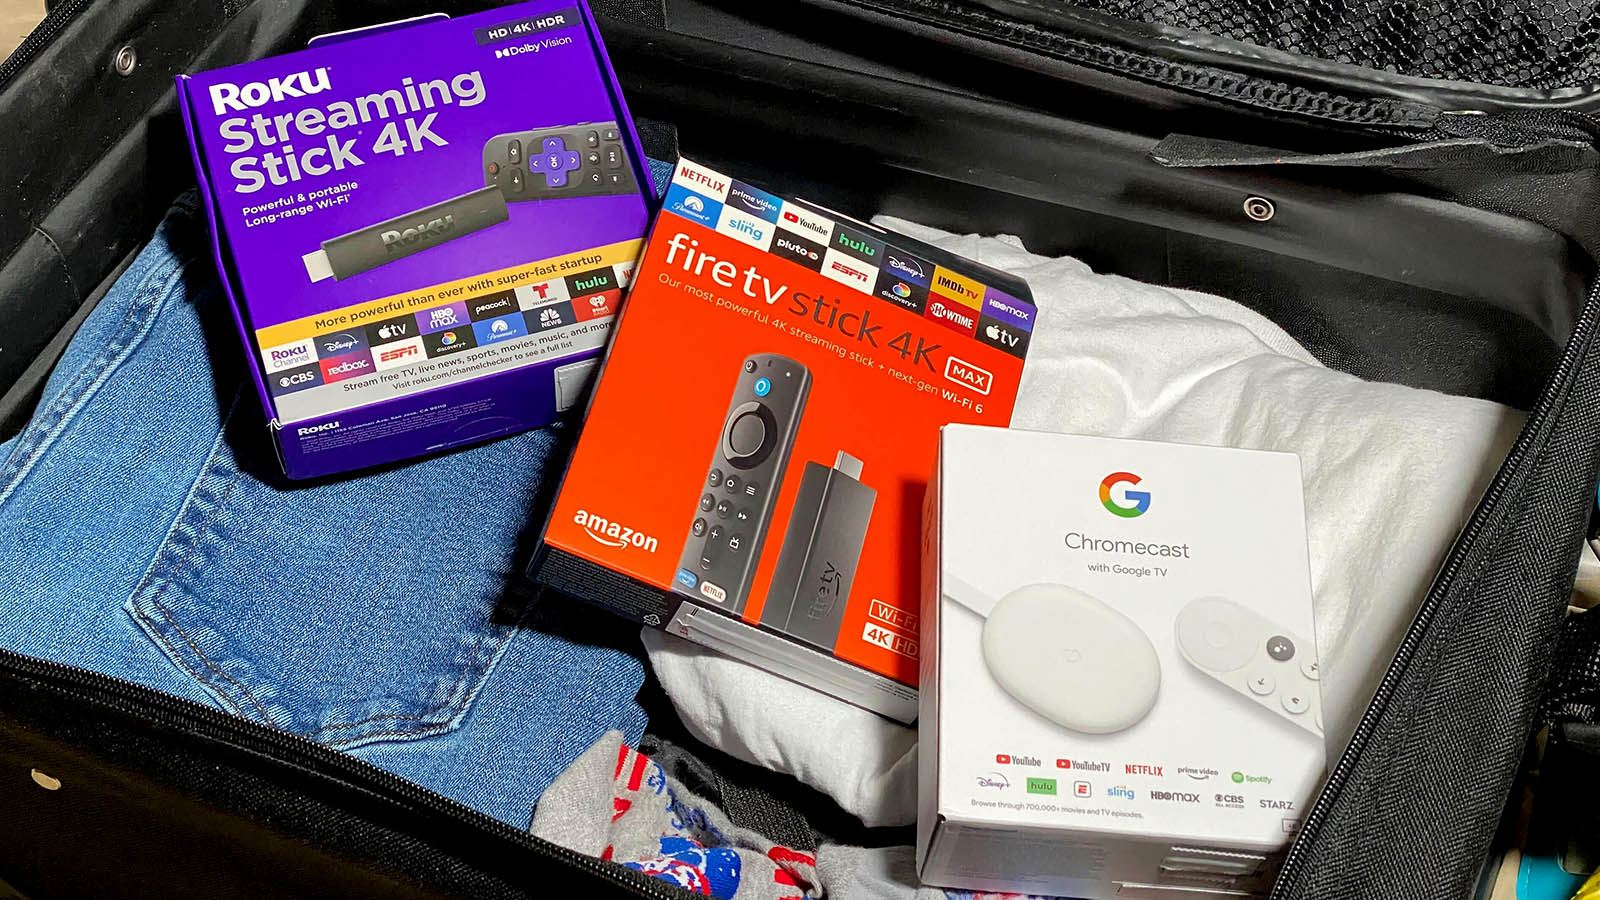 Three streaming devices in a partially packed suitcase.